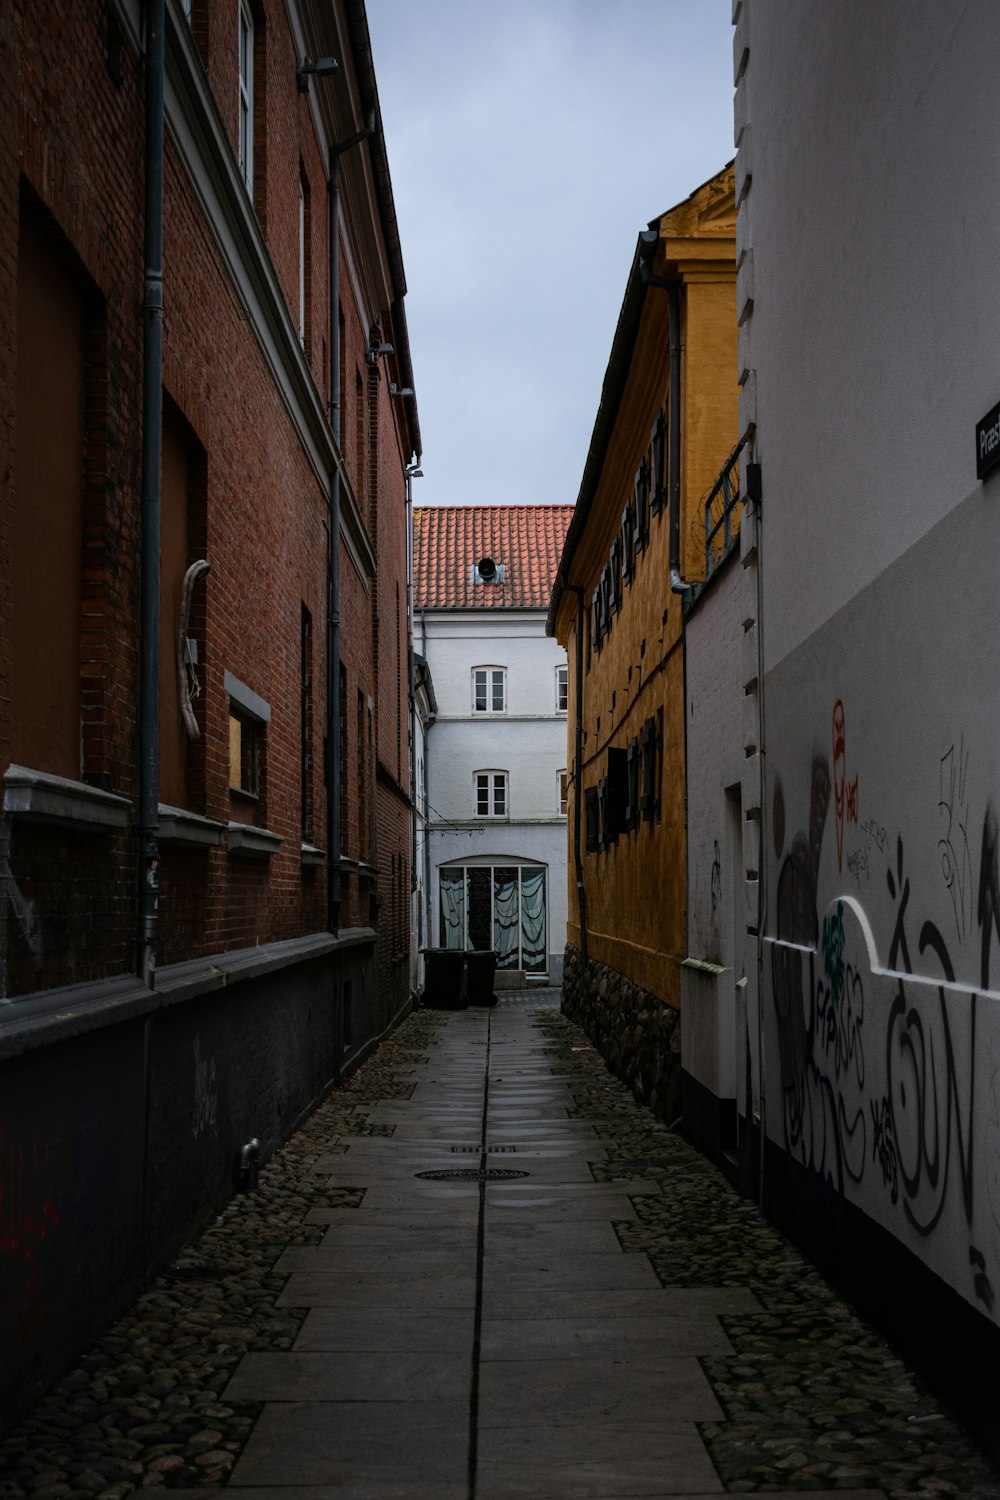 a narrow alley with graffiti on the walls